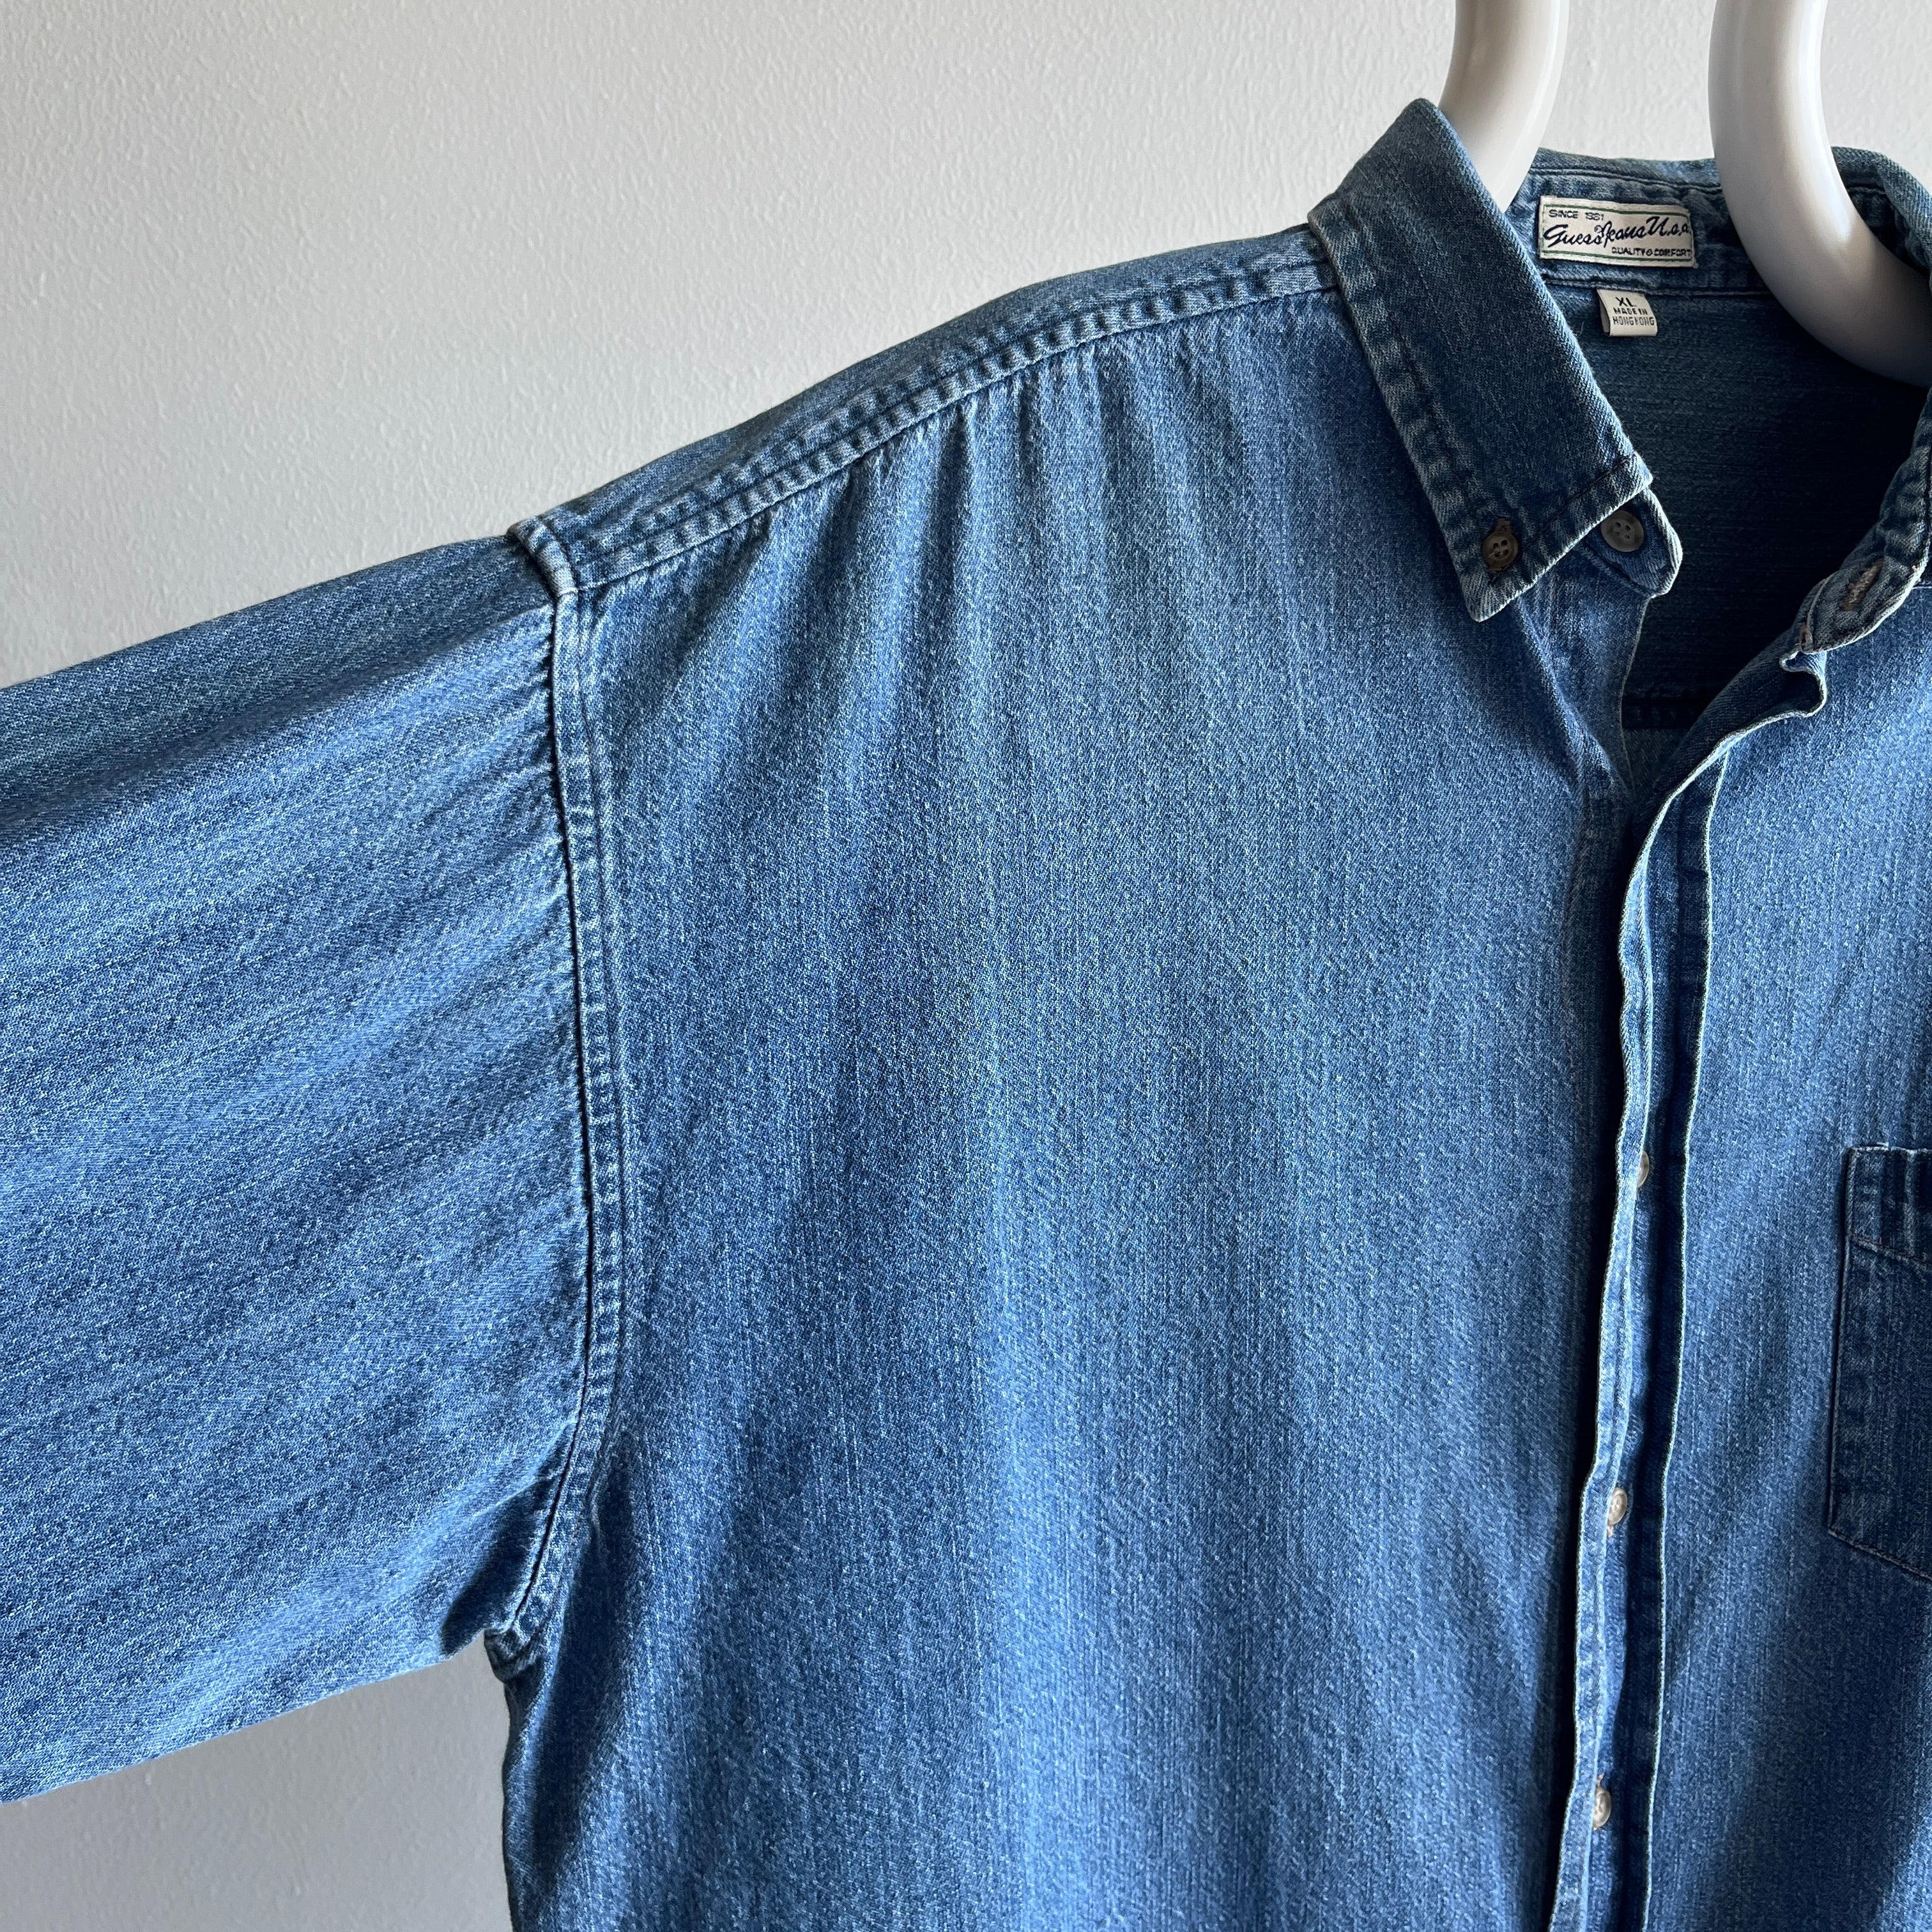 1990/2000s Guess Jeans Denim Button Down Shirt with Sun Fading